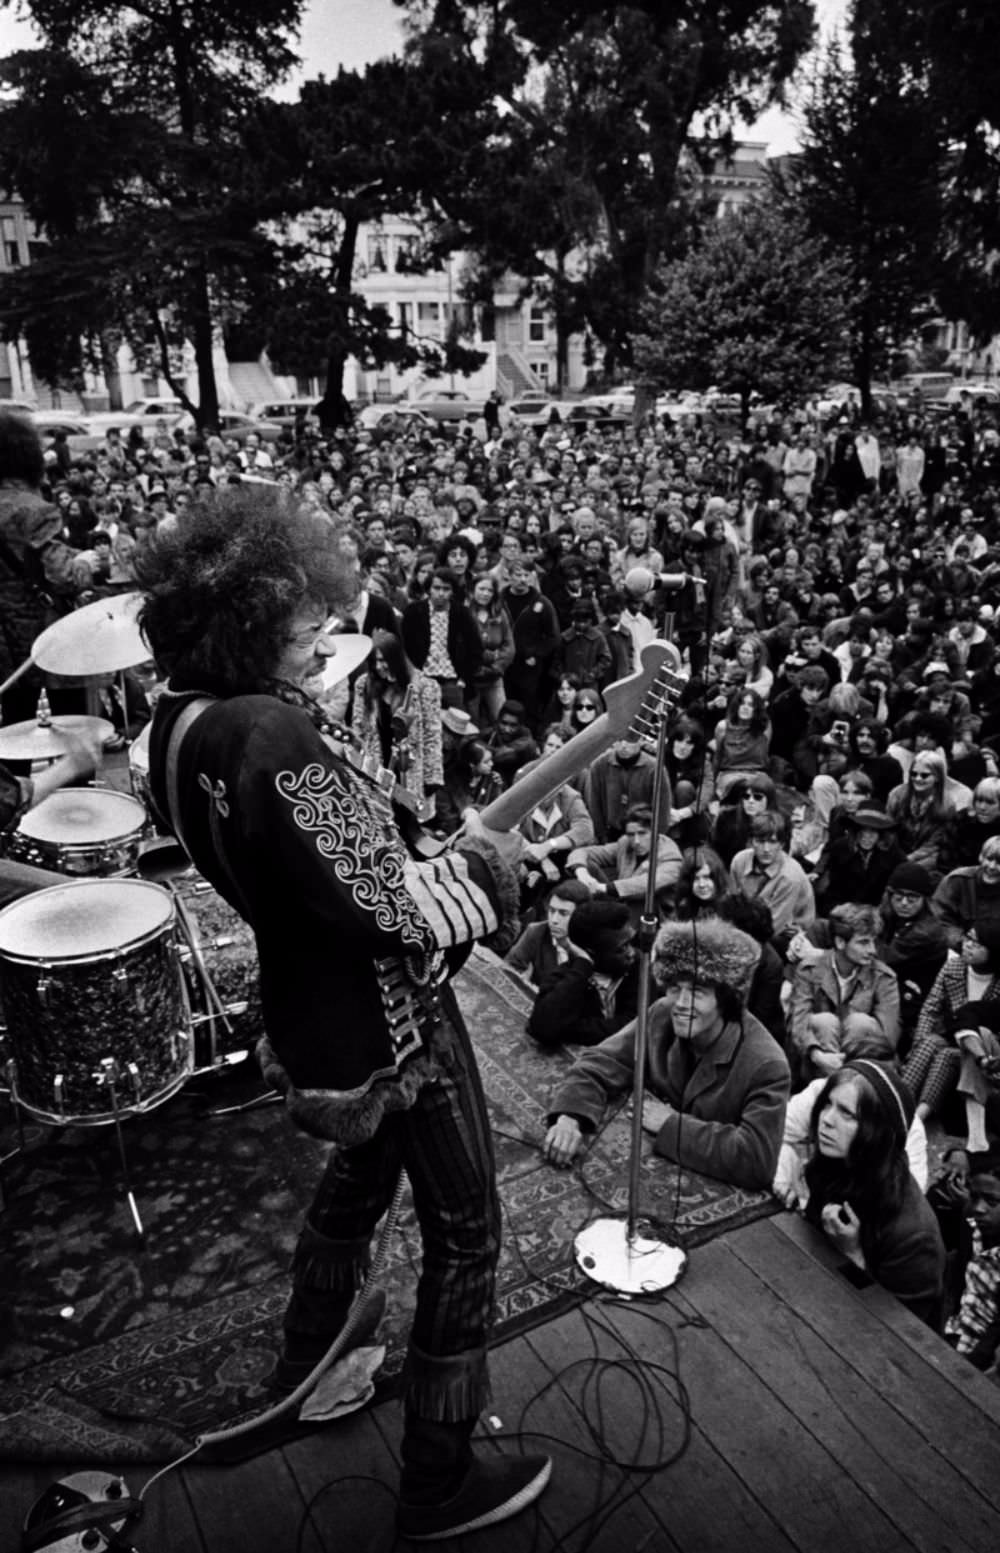 Jimi Hendrix performing onstage at a free concert in the Panhandle, June 19, 1967.